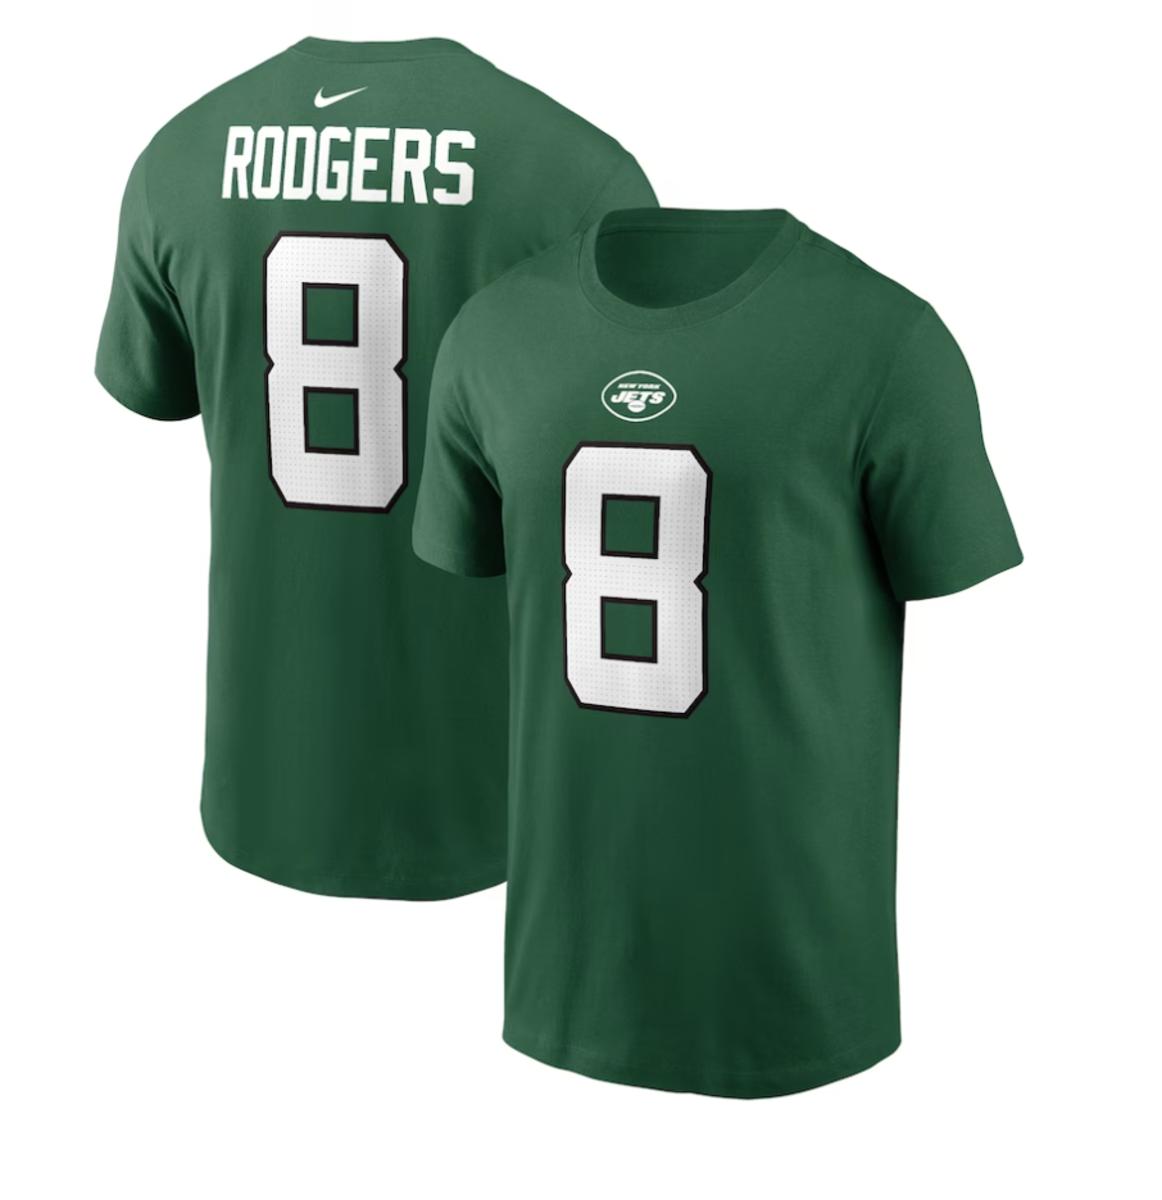 Aaron Rodgers New York Jets Nike Player Name & Number T-Shirt - $39.99